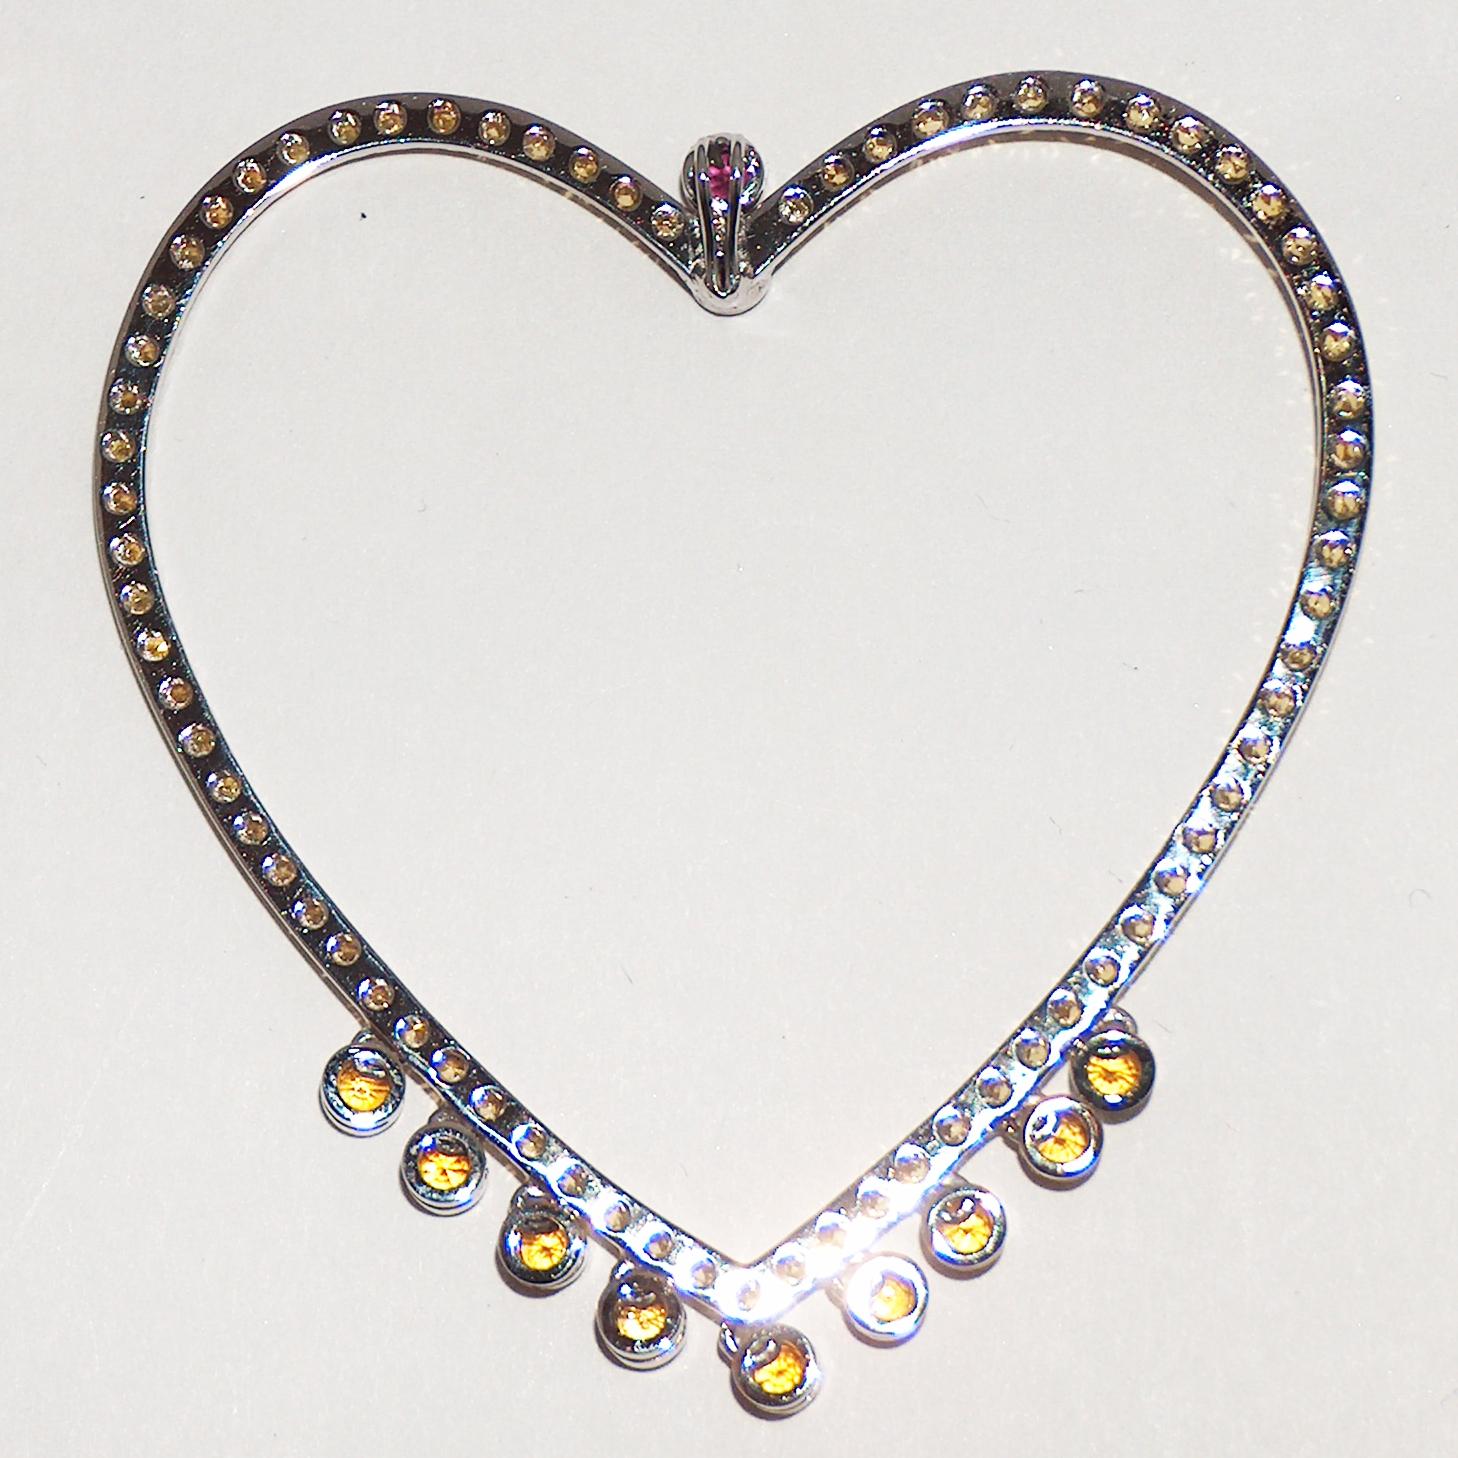 Women's Paolo Piovan Yellow Sapphires and Rubies 18 Karat White Gold Heart Necklace For Sale